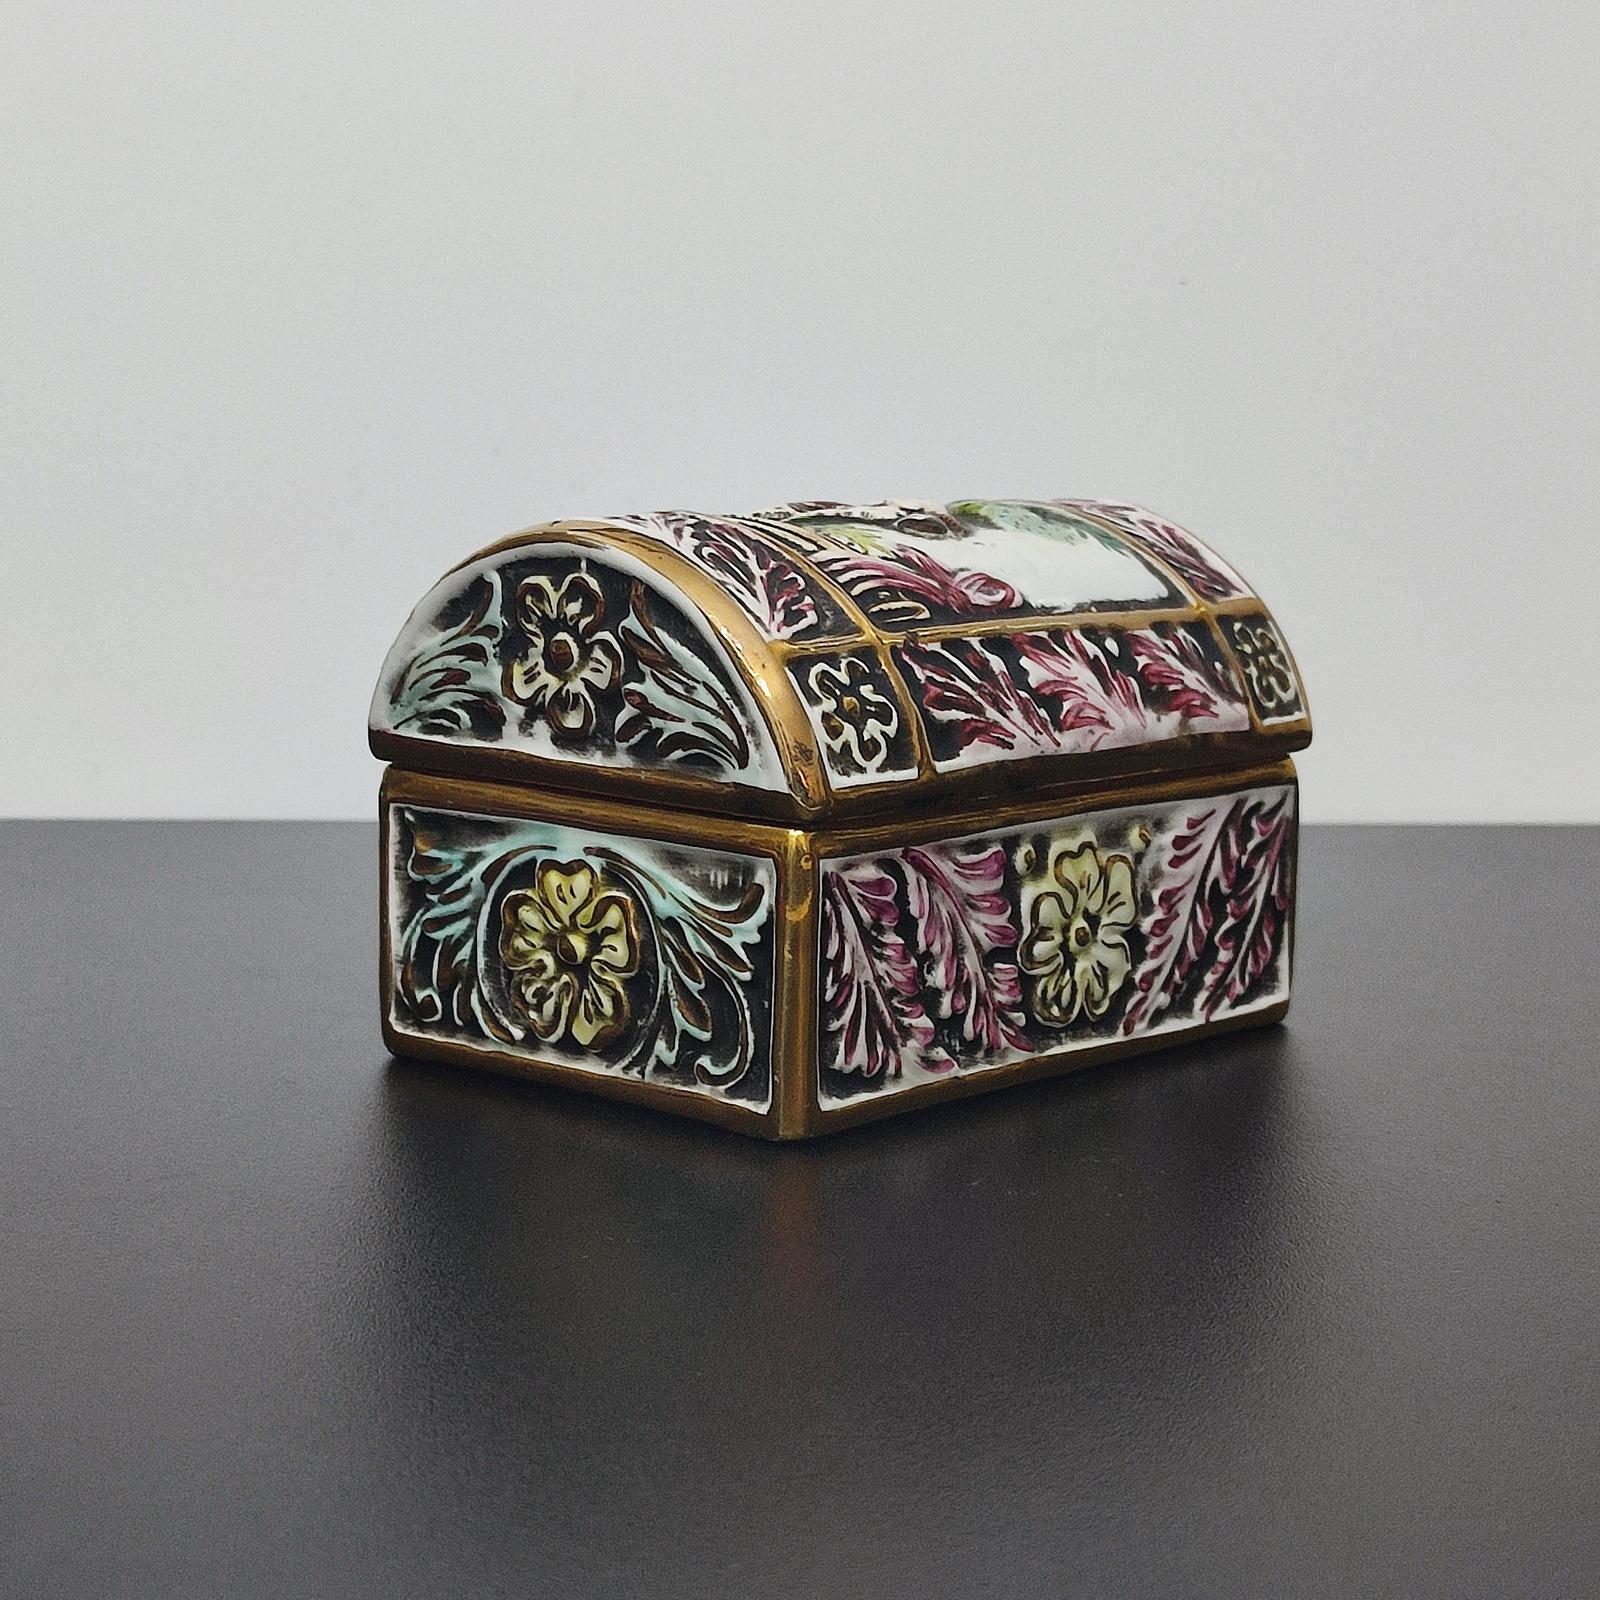 Capodimonte Porcelain Chest, Jewelry Box, Italy Mid 20th Century - FREE SHIPPING For Sale 3